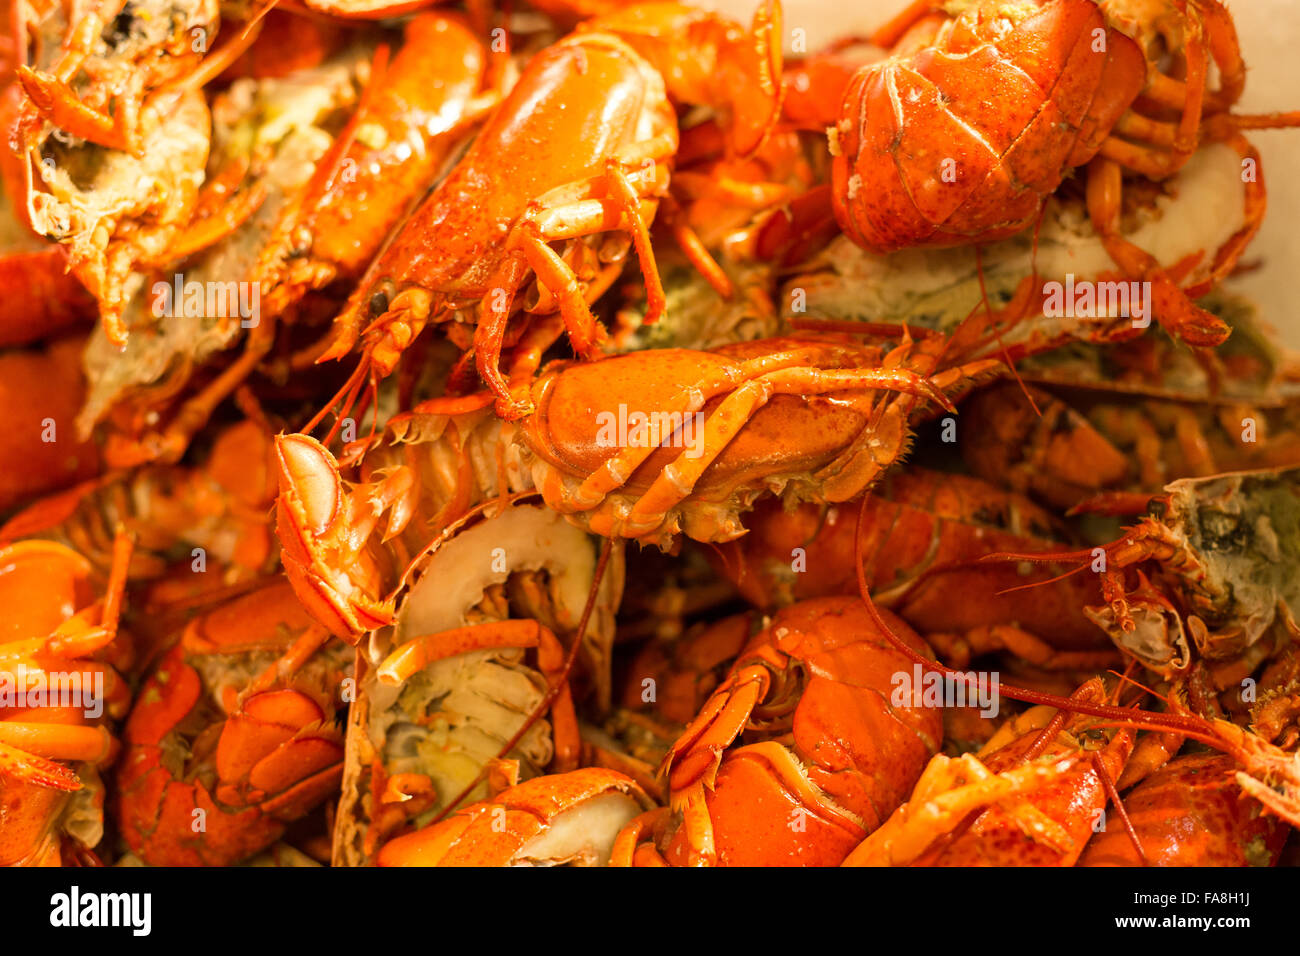 cooked lobster, seafood meal Stock Photo